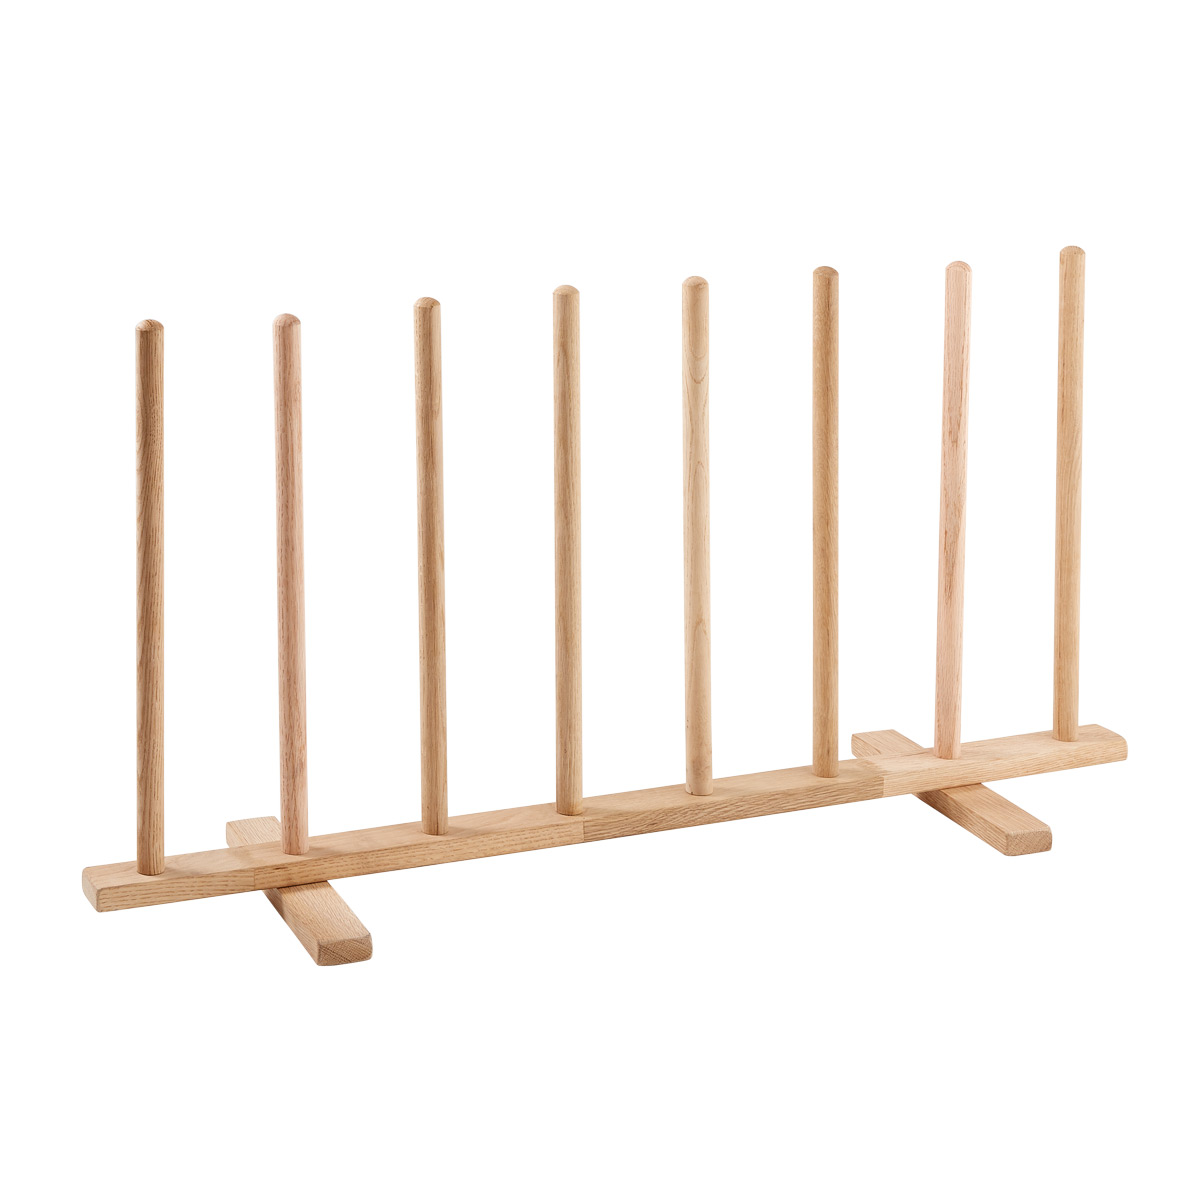 https://www.containerstore.com/catalogimages/383514/10080435-4-pair-boot-rack-natural.jpg